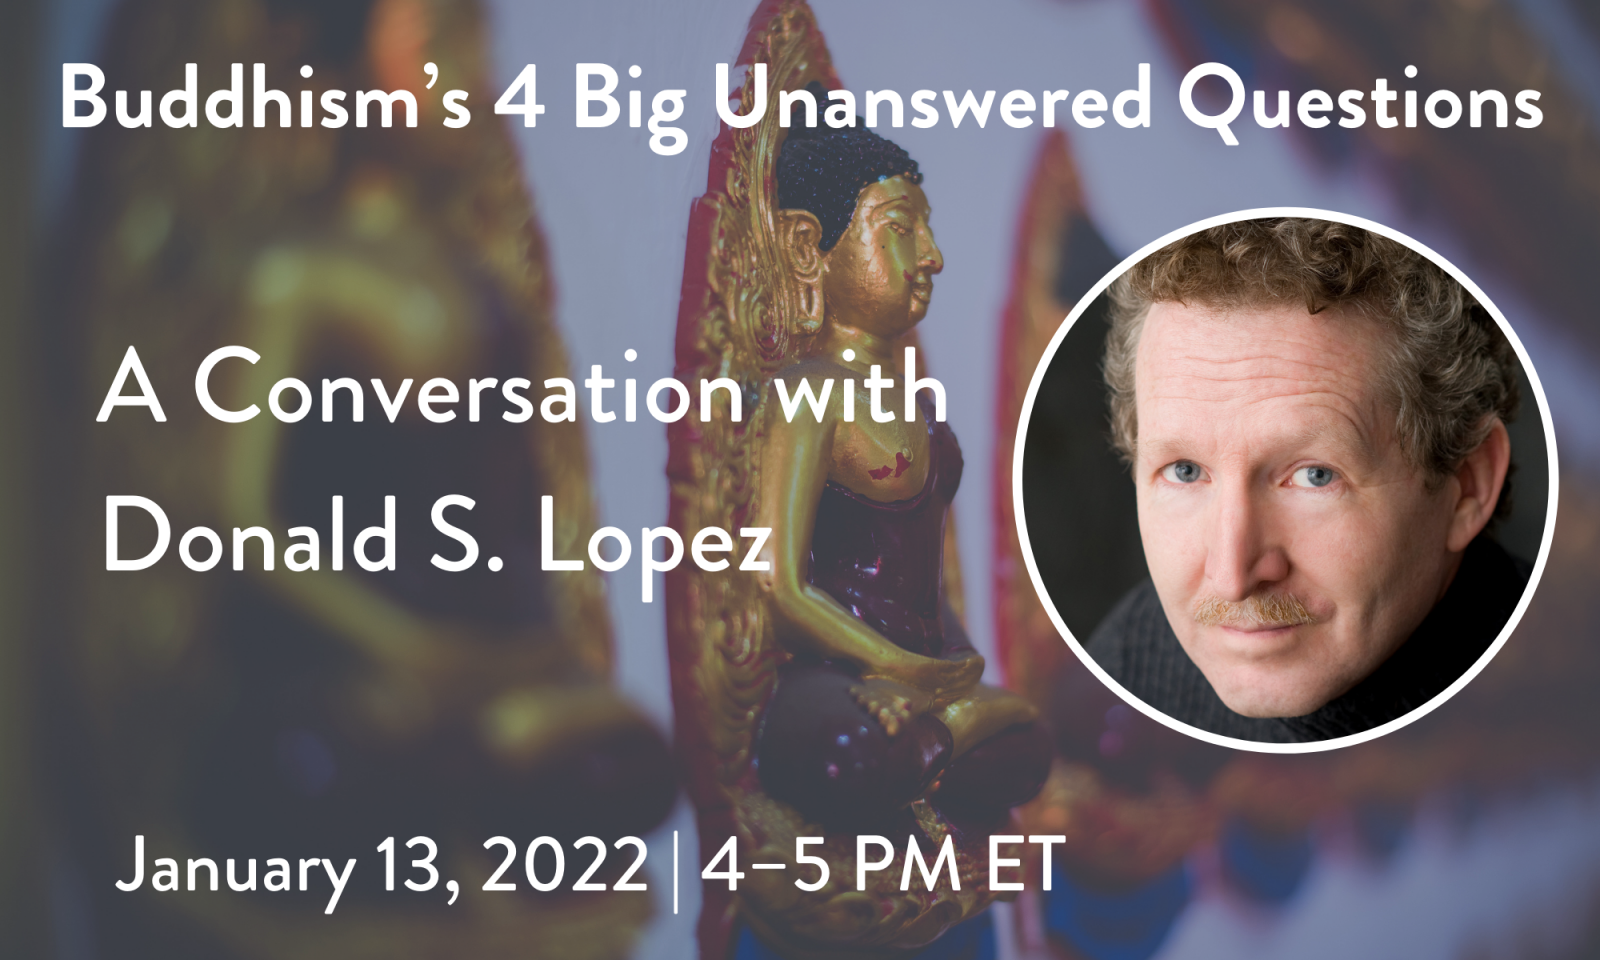 Buddhism’s 4 Big Unanswered Questions: A Conversation with Donald S. Lopez